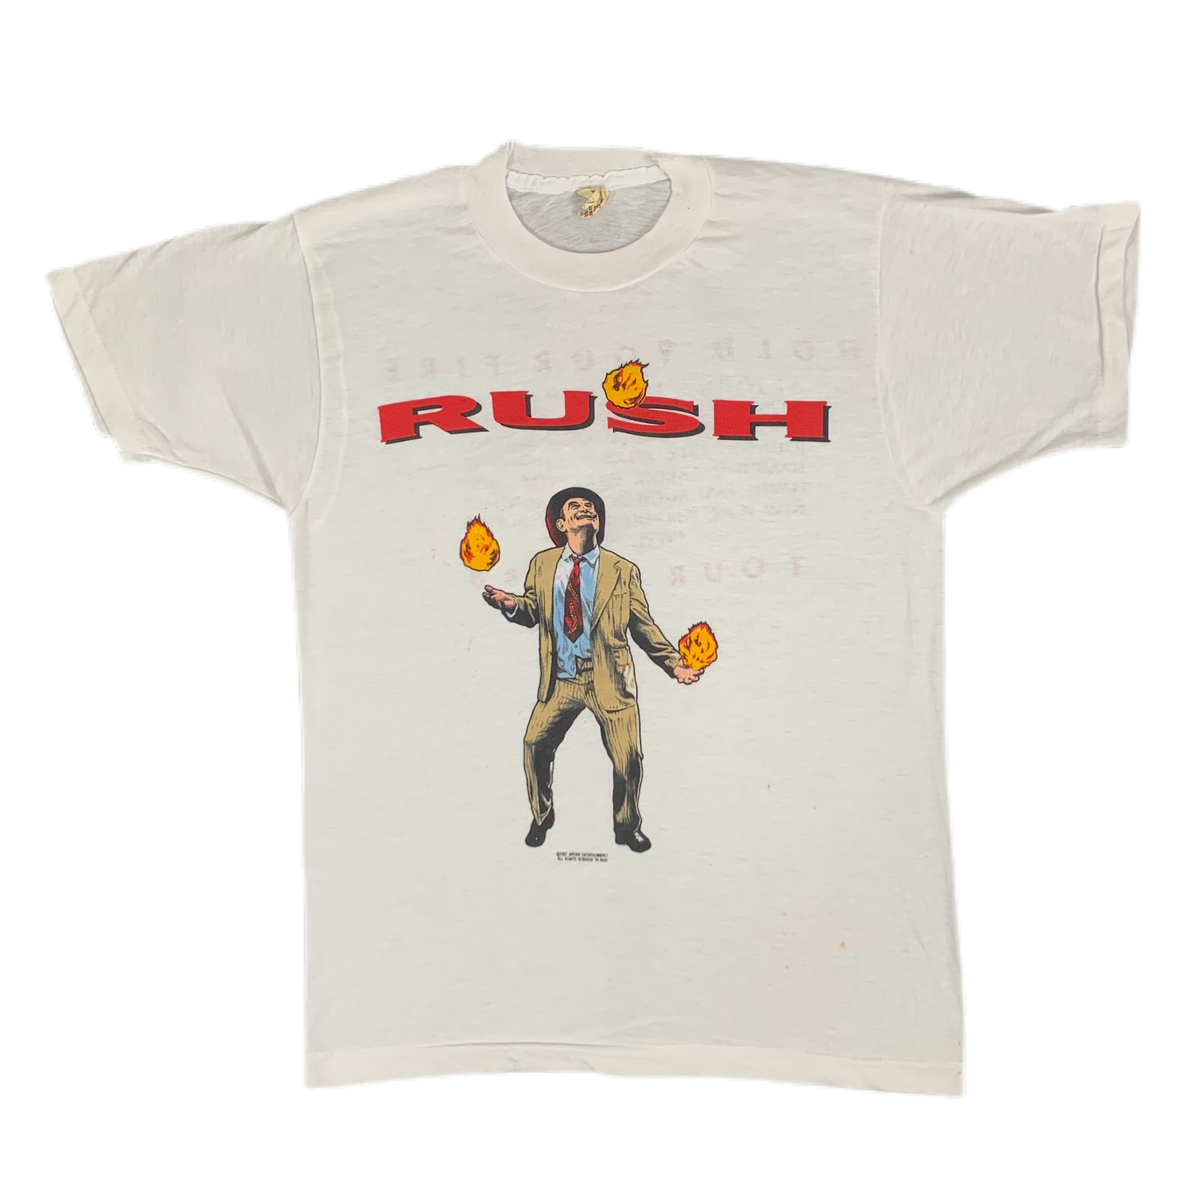 Vintage Rush &quot;Hold Your Fire&quot; T-Shirt